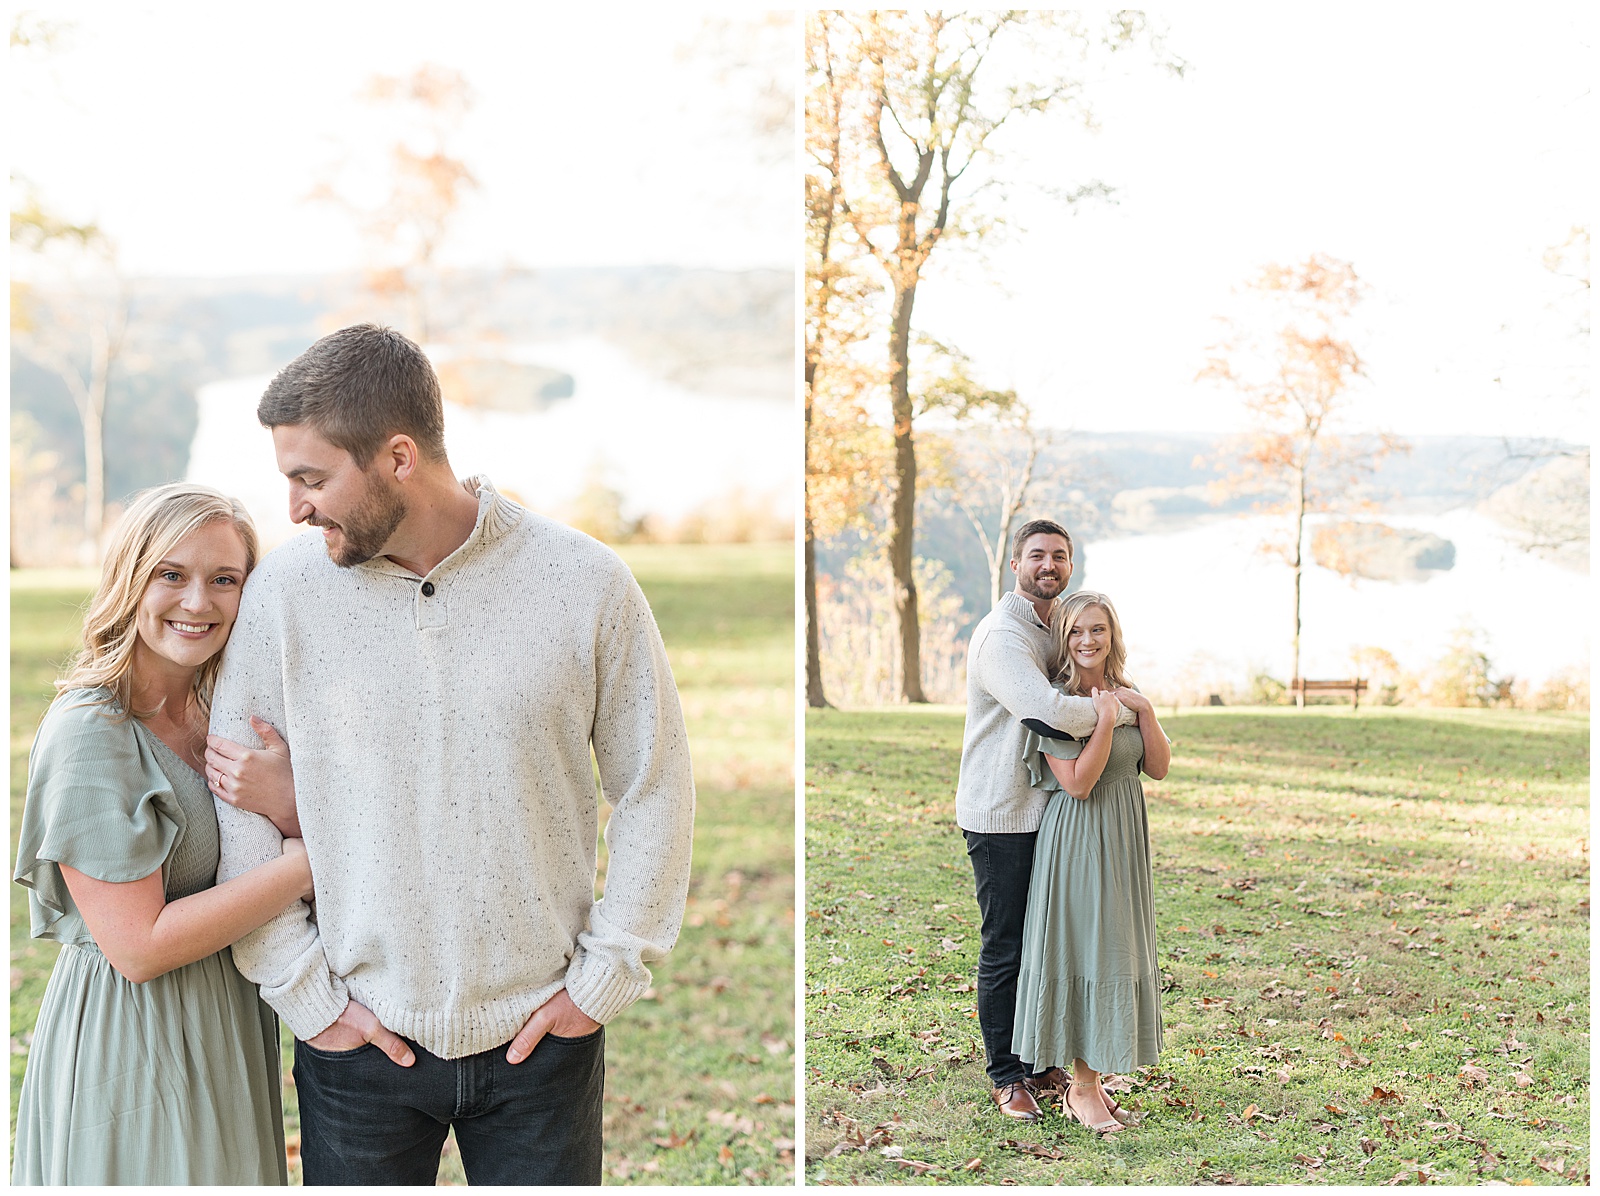 guy hugging girl from behind as they both smile at camera on sunny fall day with the susquehanna river behind them